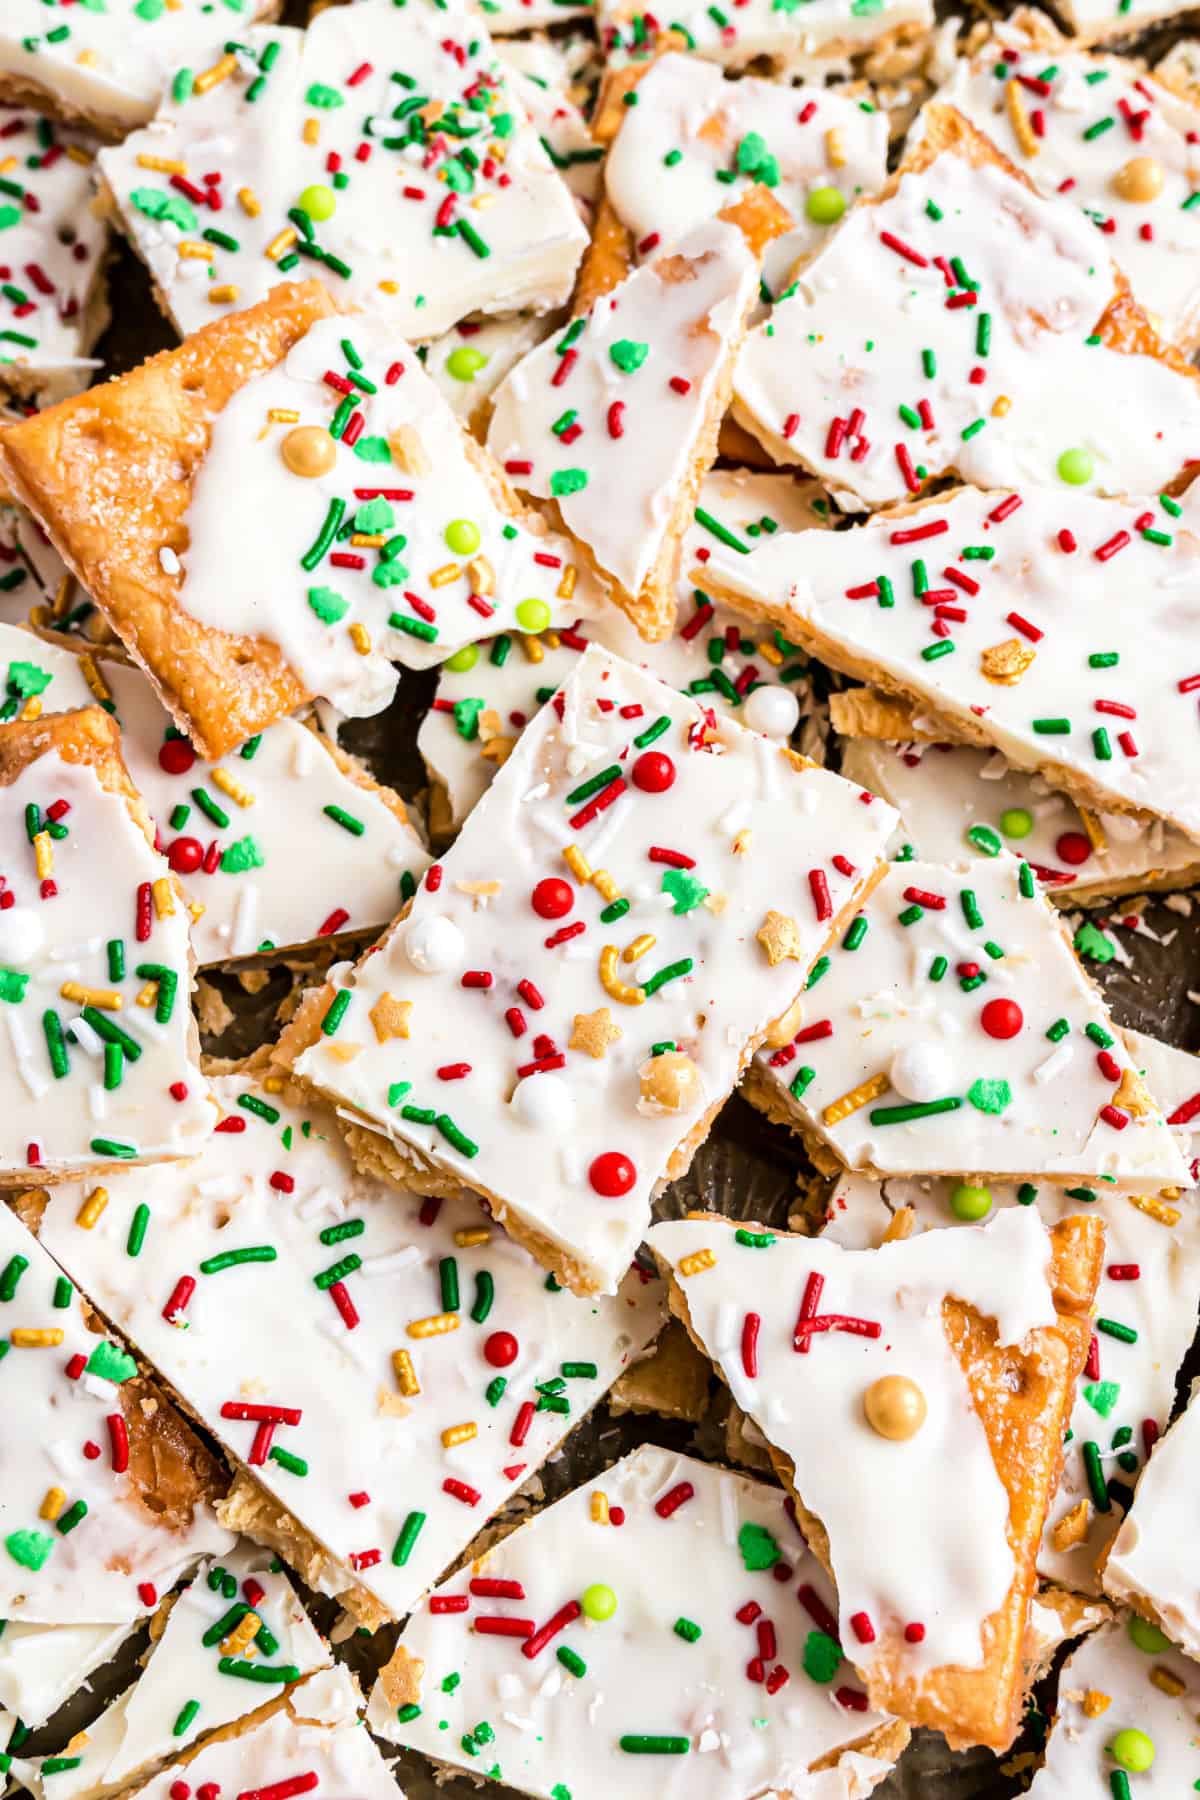 Brocken pieces of Christmas crack stacked on a cookie sheet.